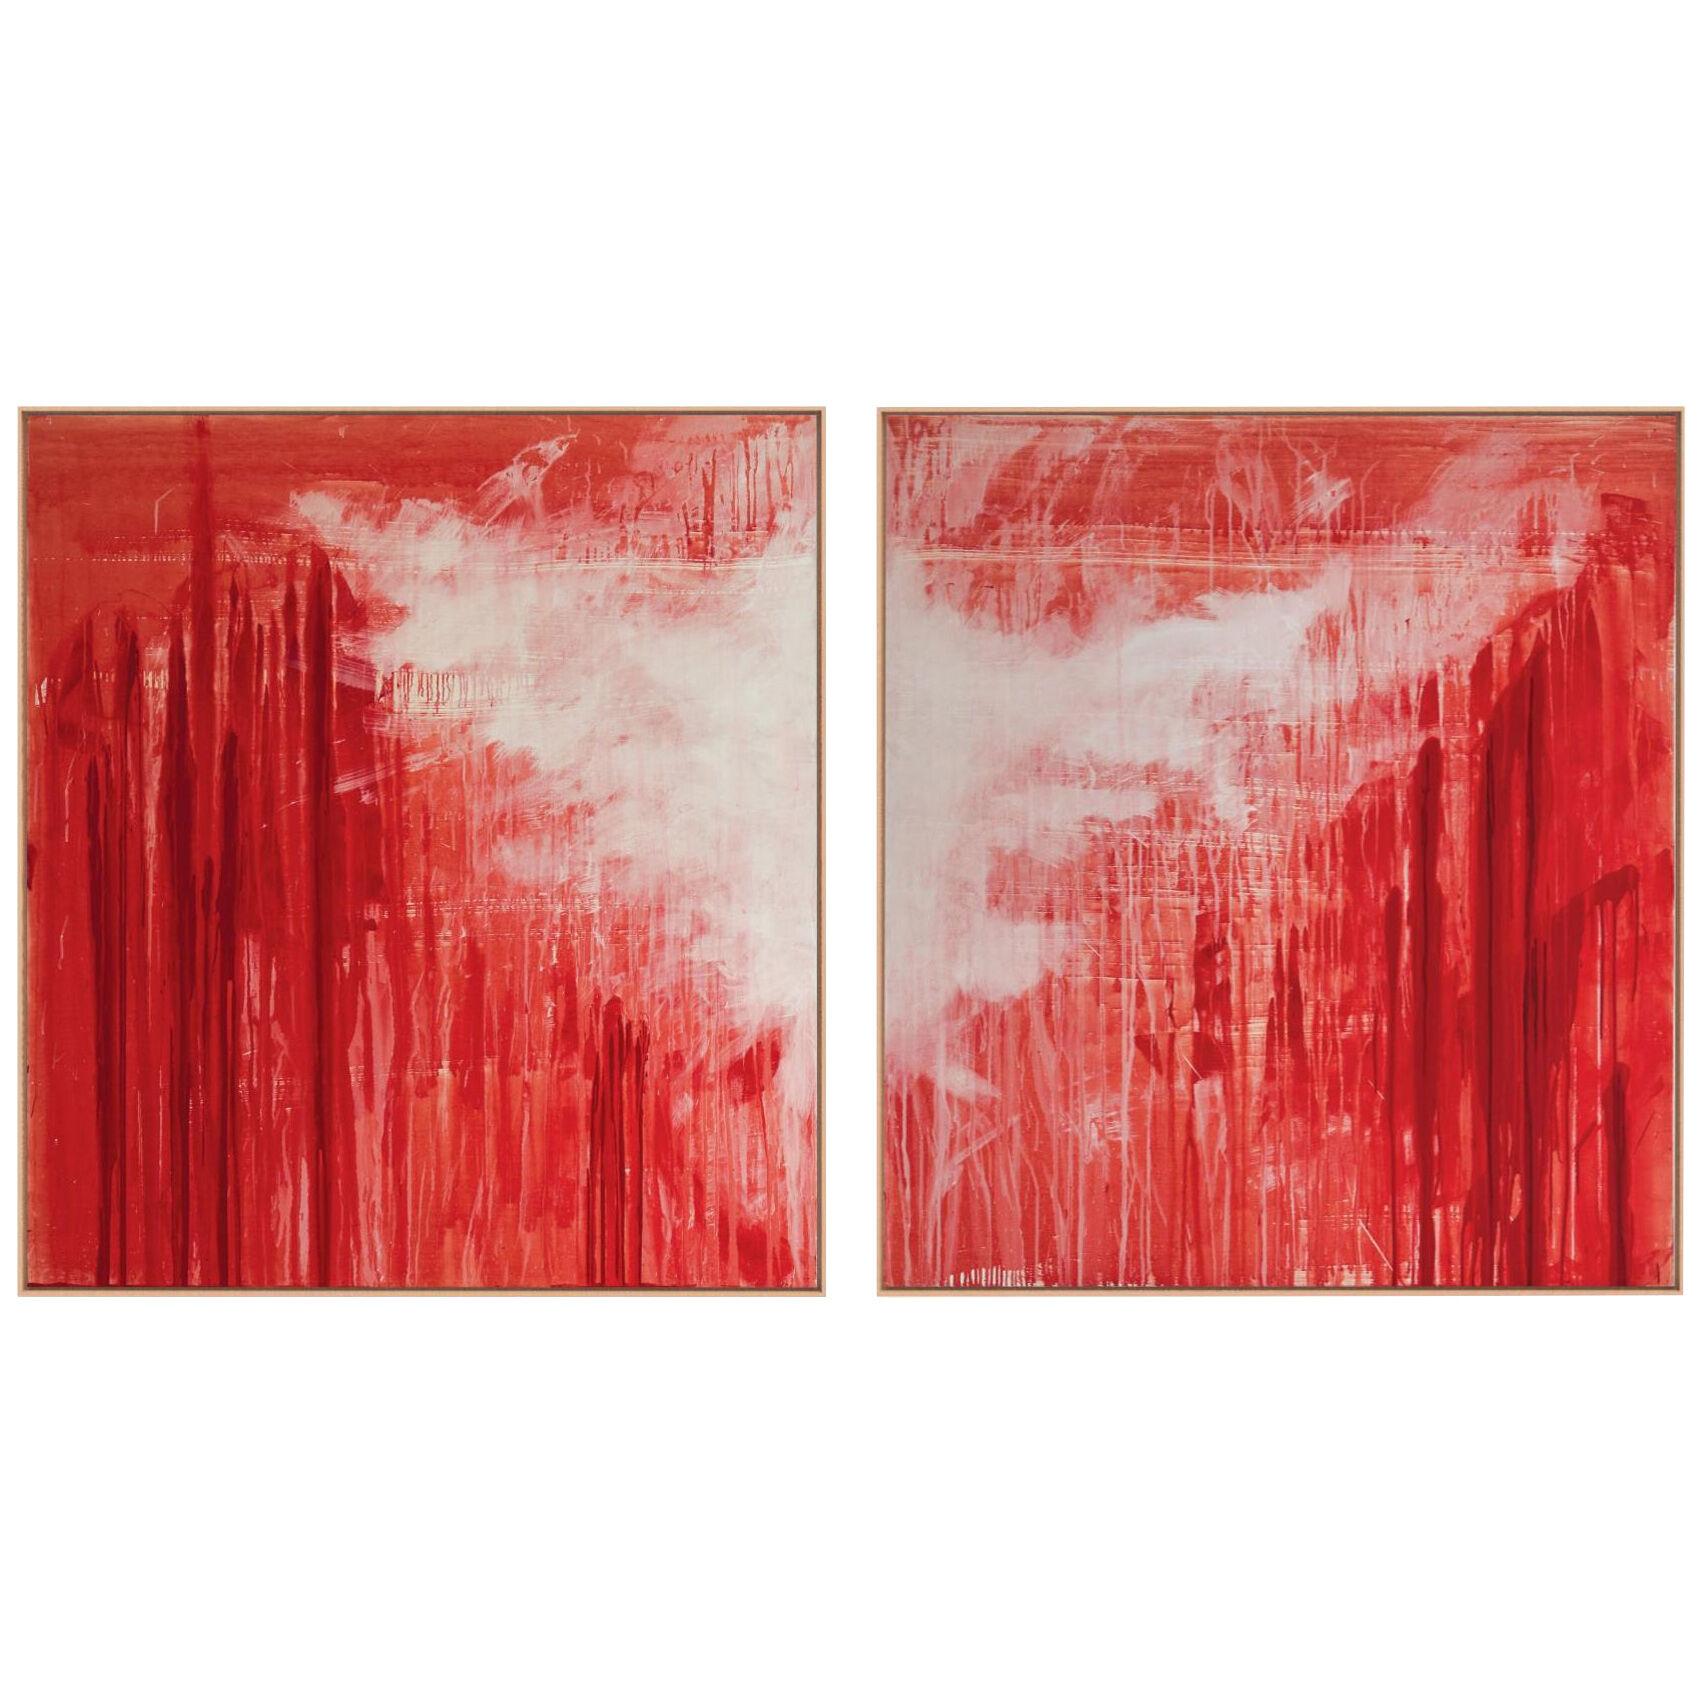 Acrylic and Ink Diptych Painting Origine XI and XII by Benjamin Poulanges